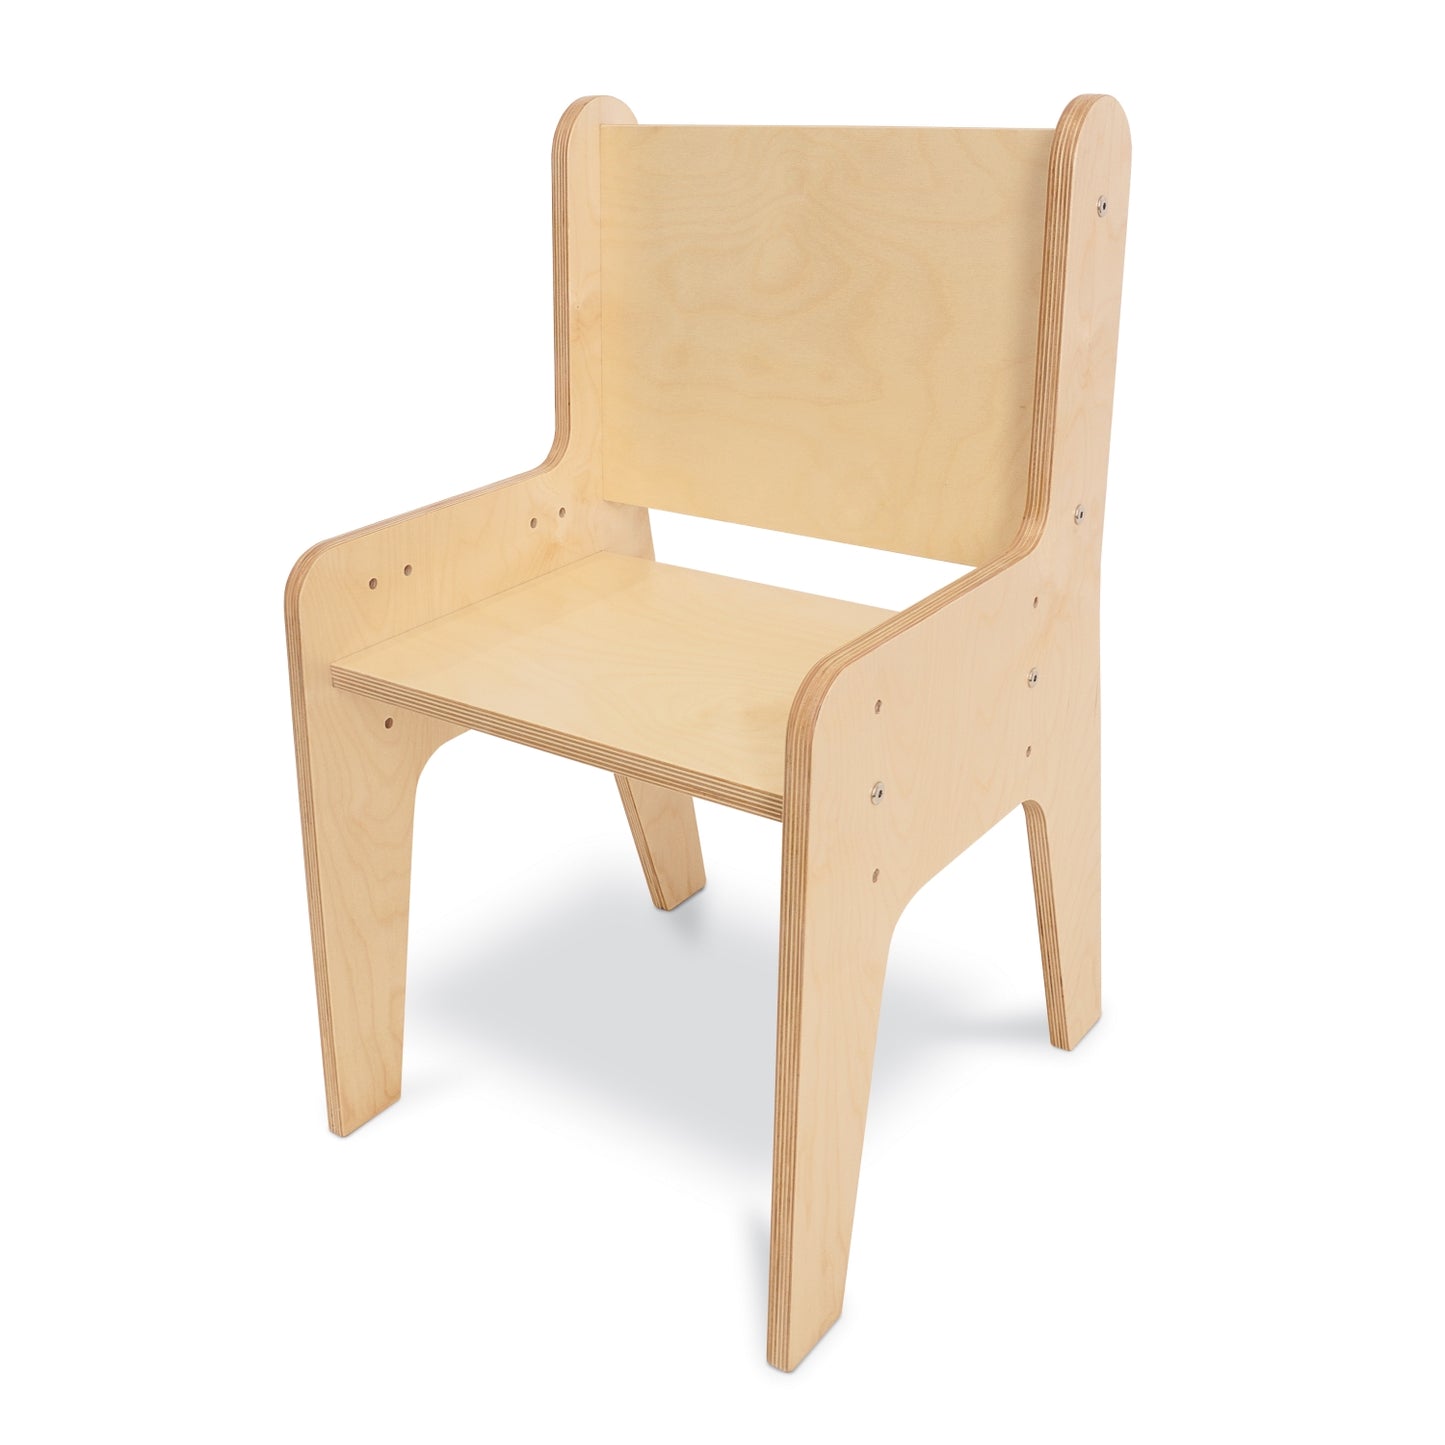 Adjustable Economy Natural Chair